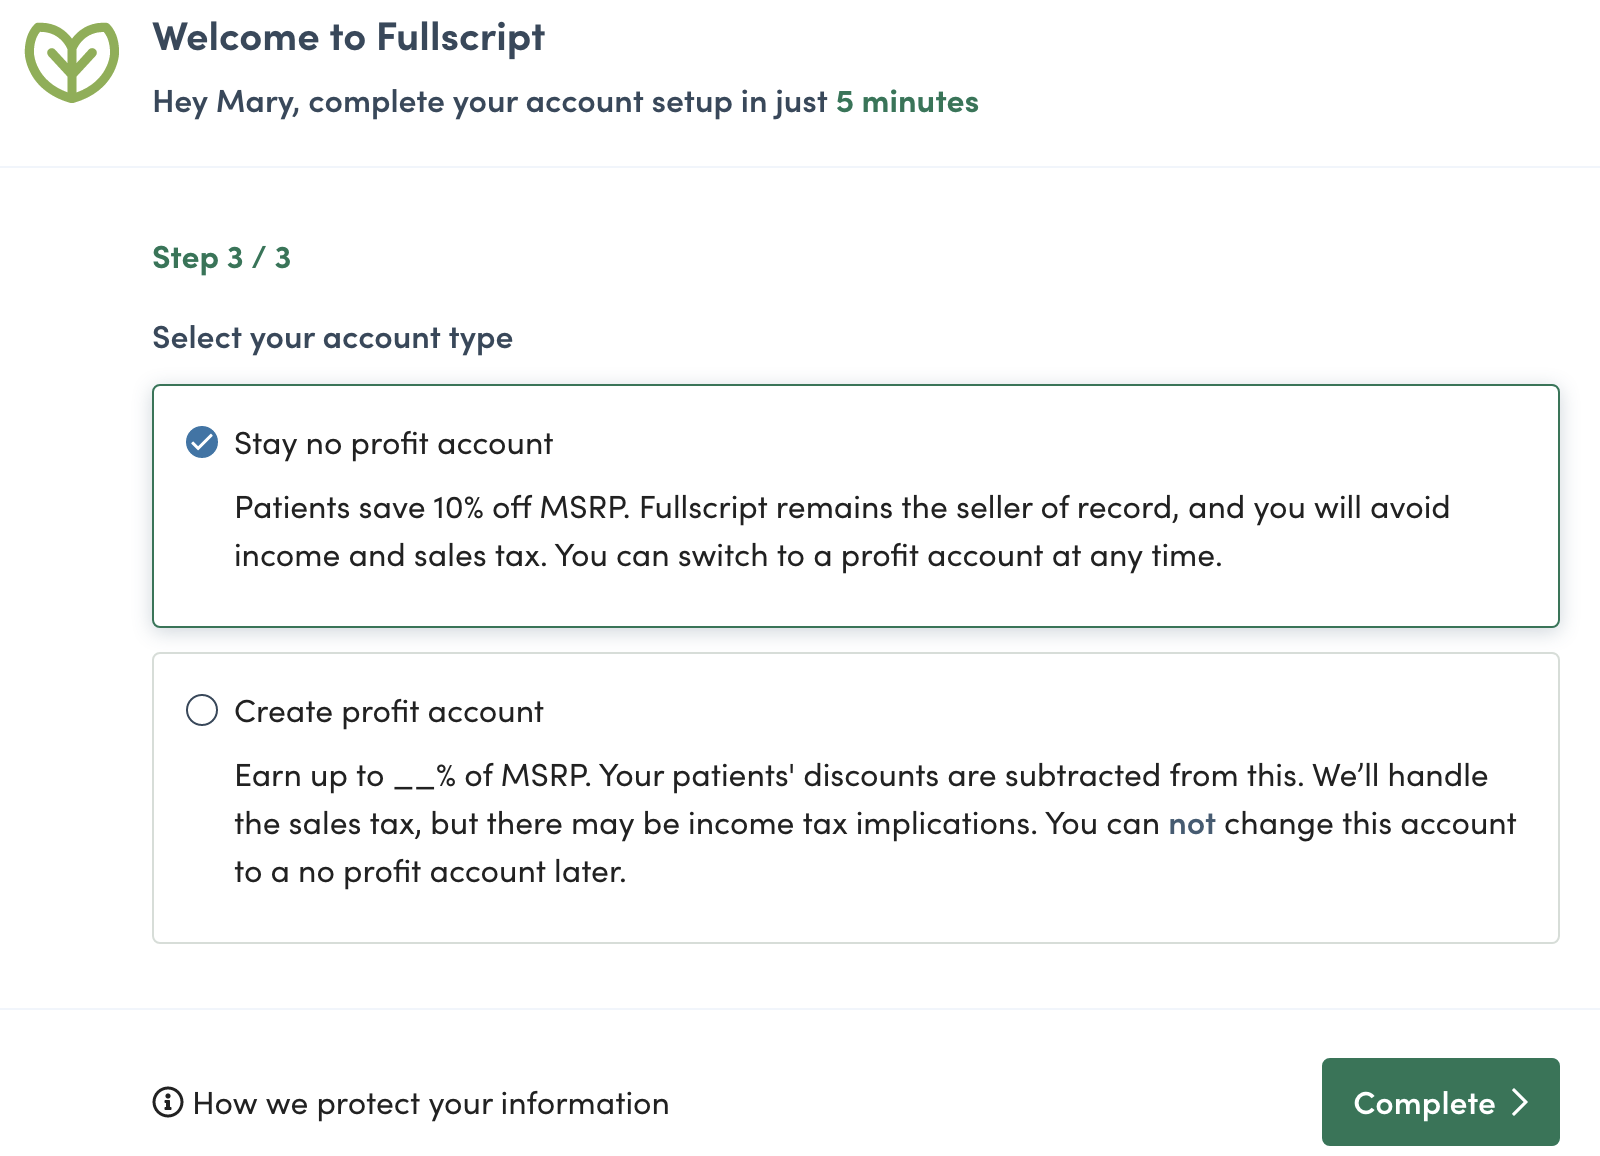 select to stay a no profit account or create a for profit account.